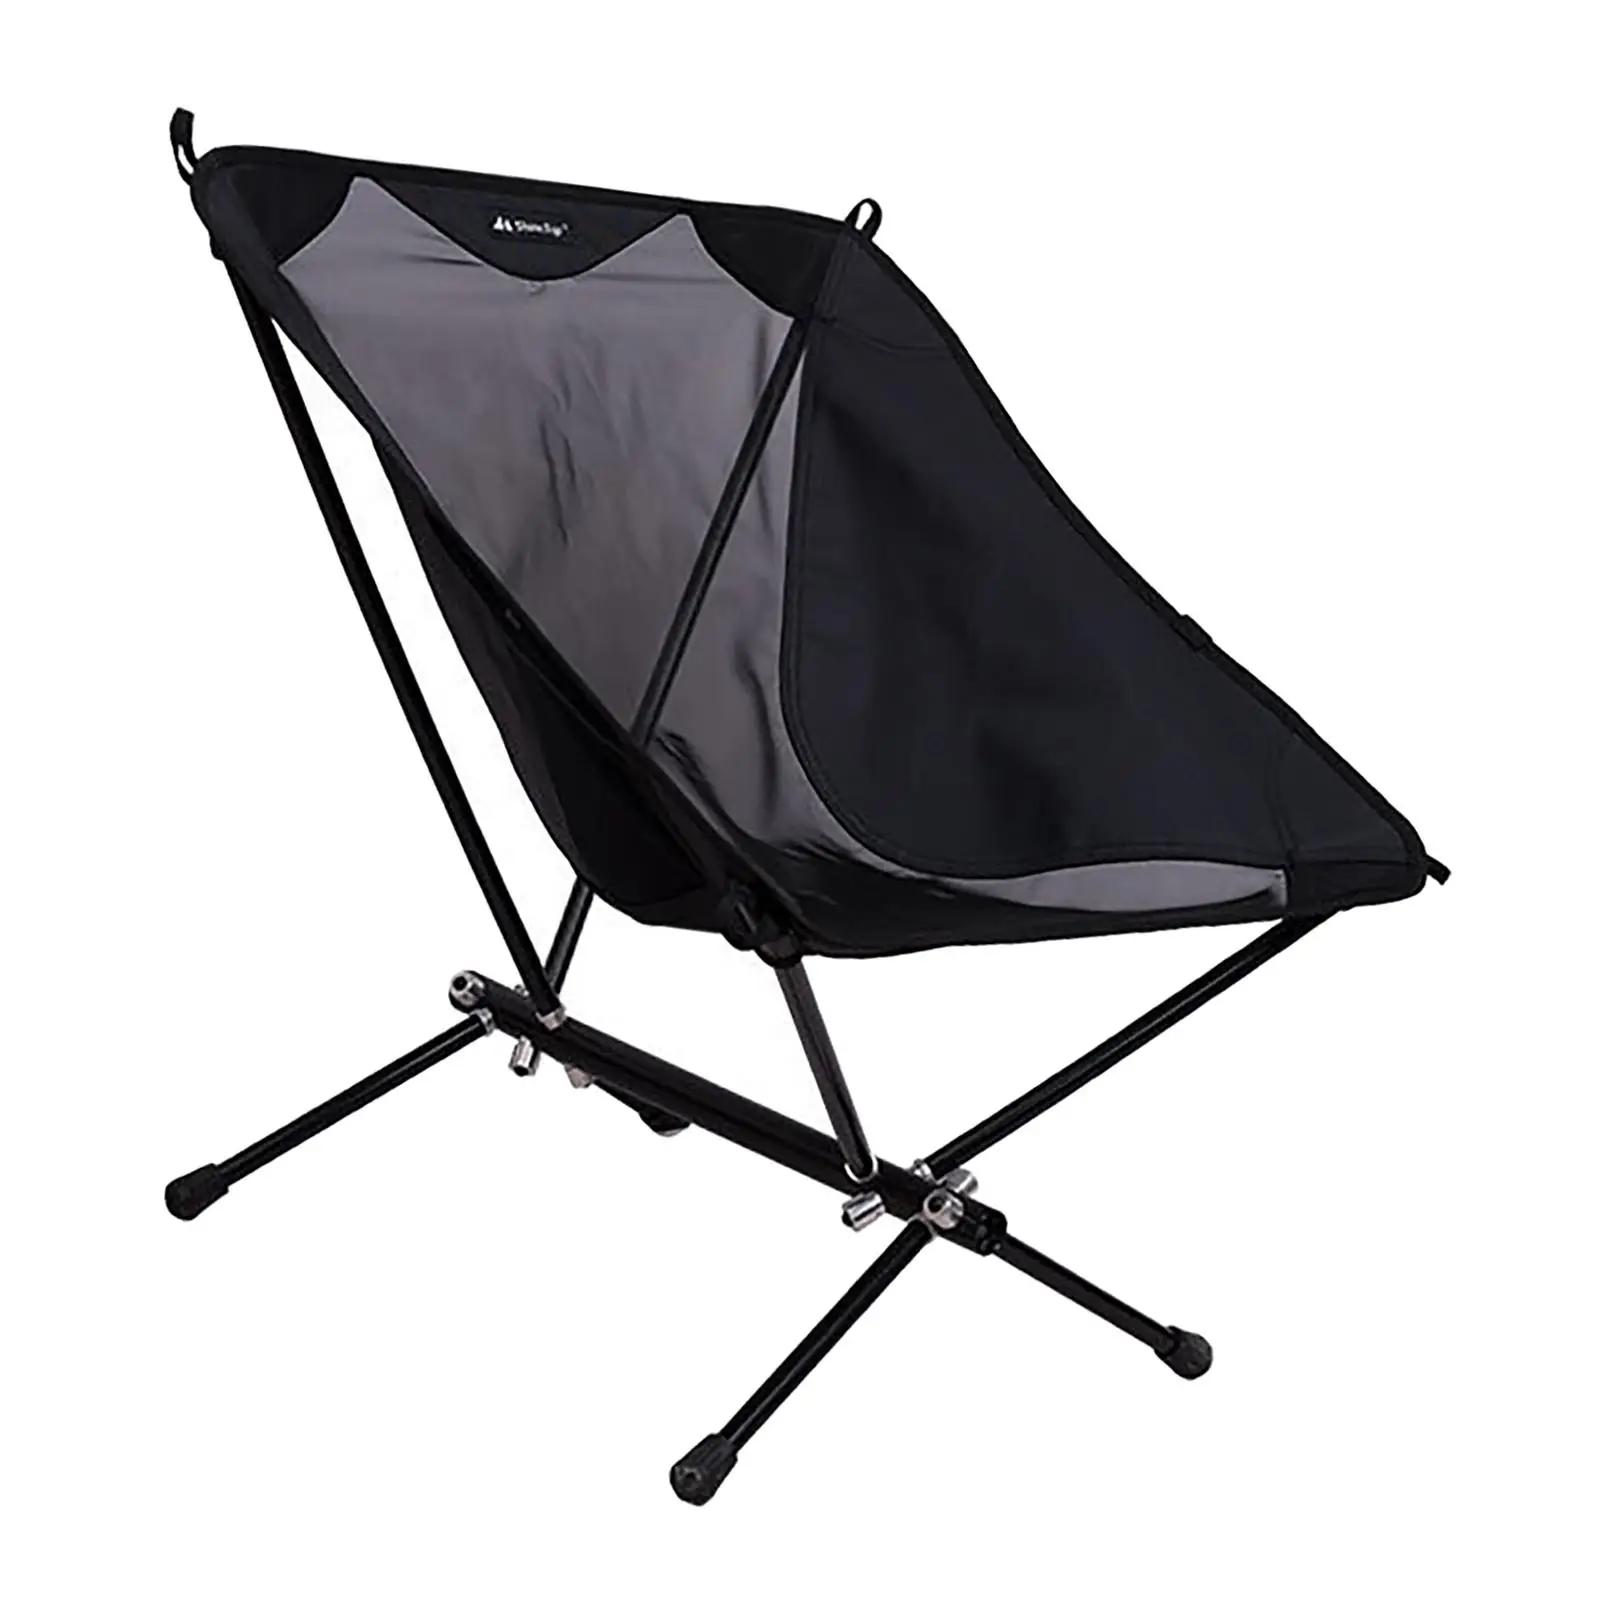 Folding Picnic Chair Lightweight Mini Compact for BBQ Camping Music Festival Fishing